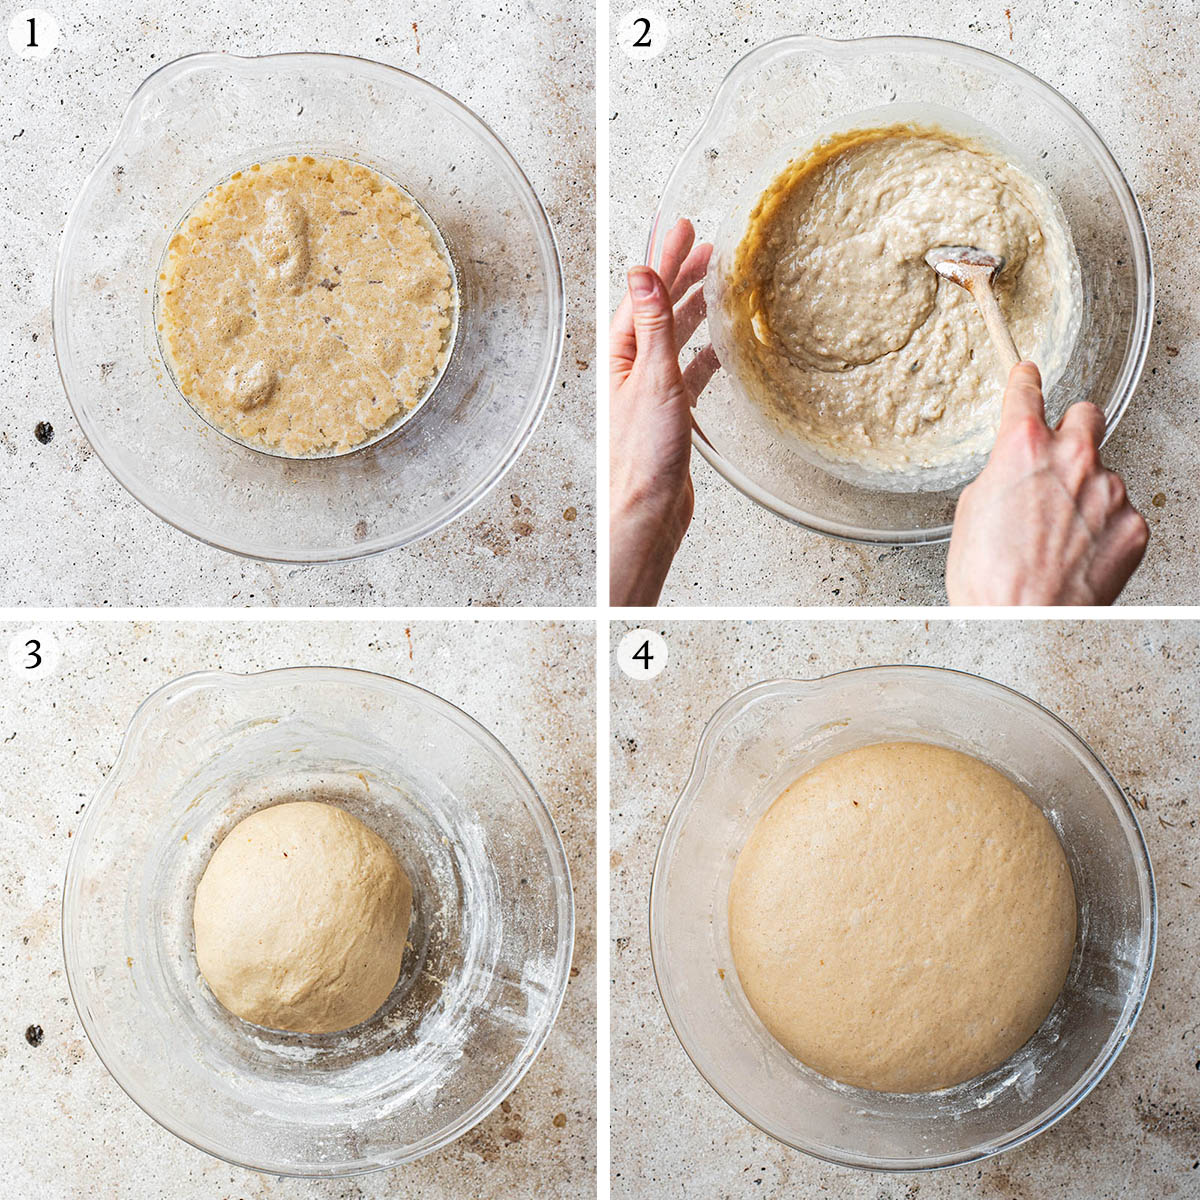 Yeast cake steps 1 to 4.